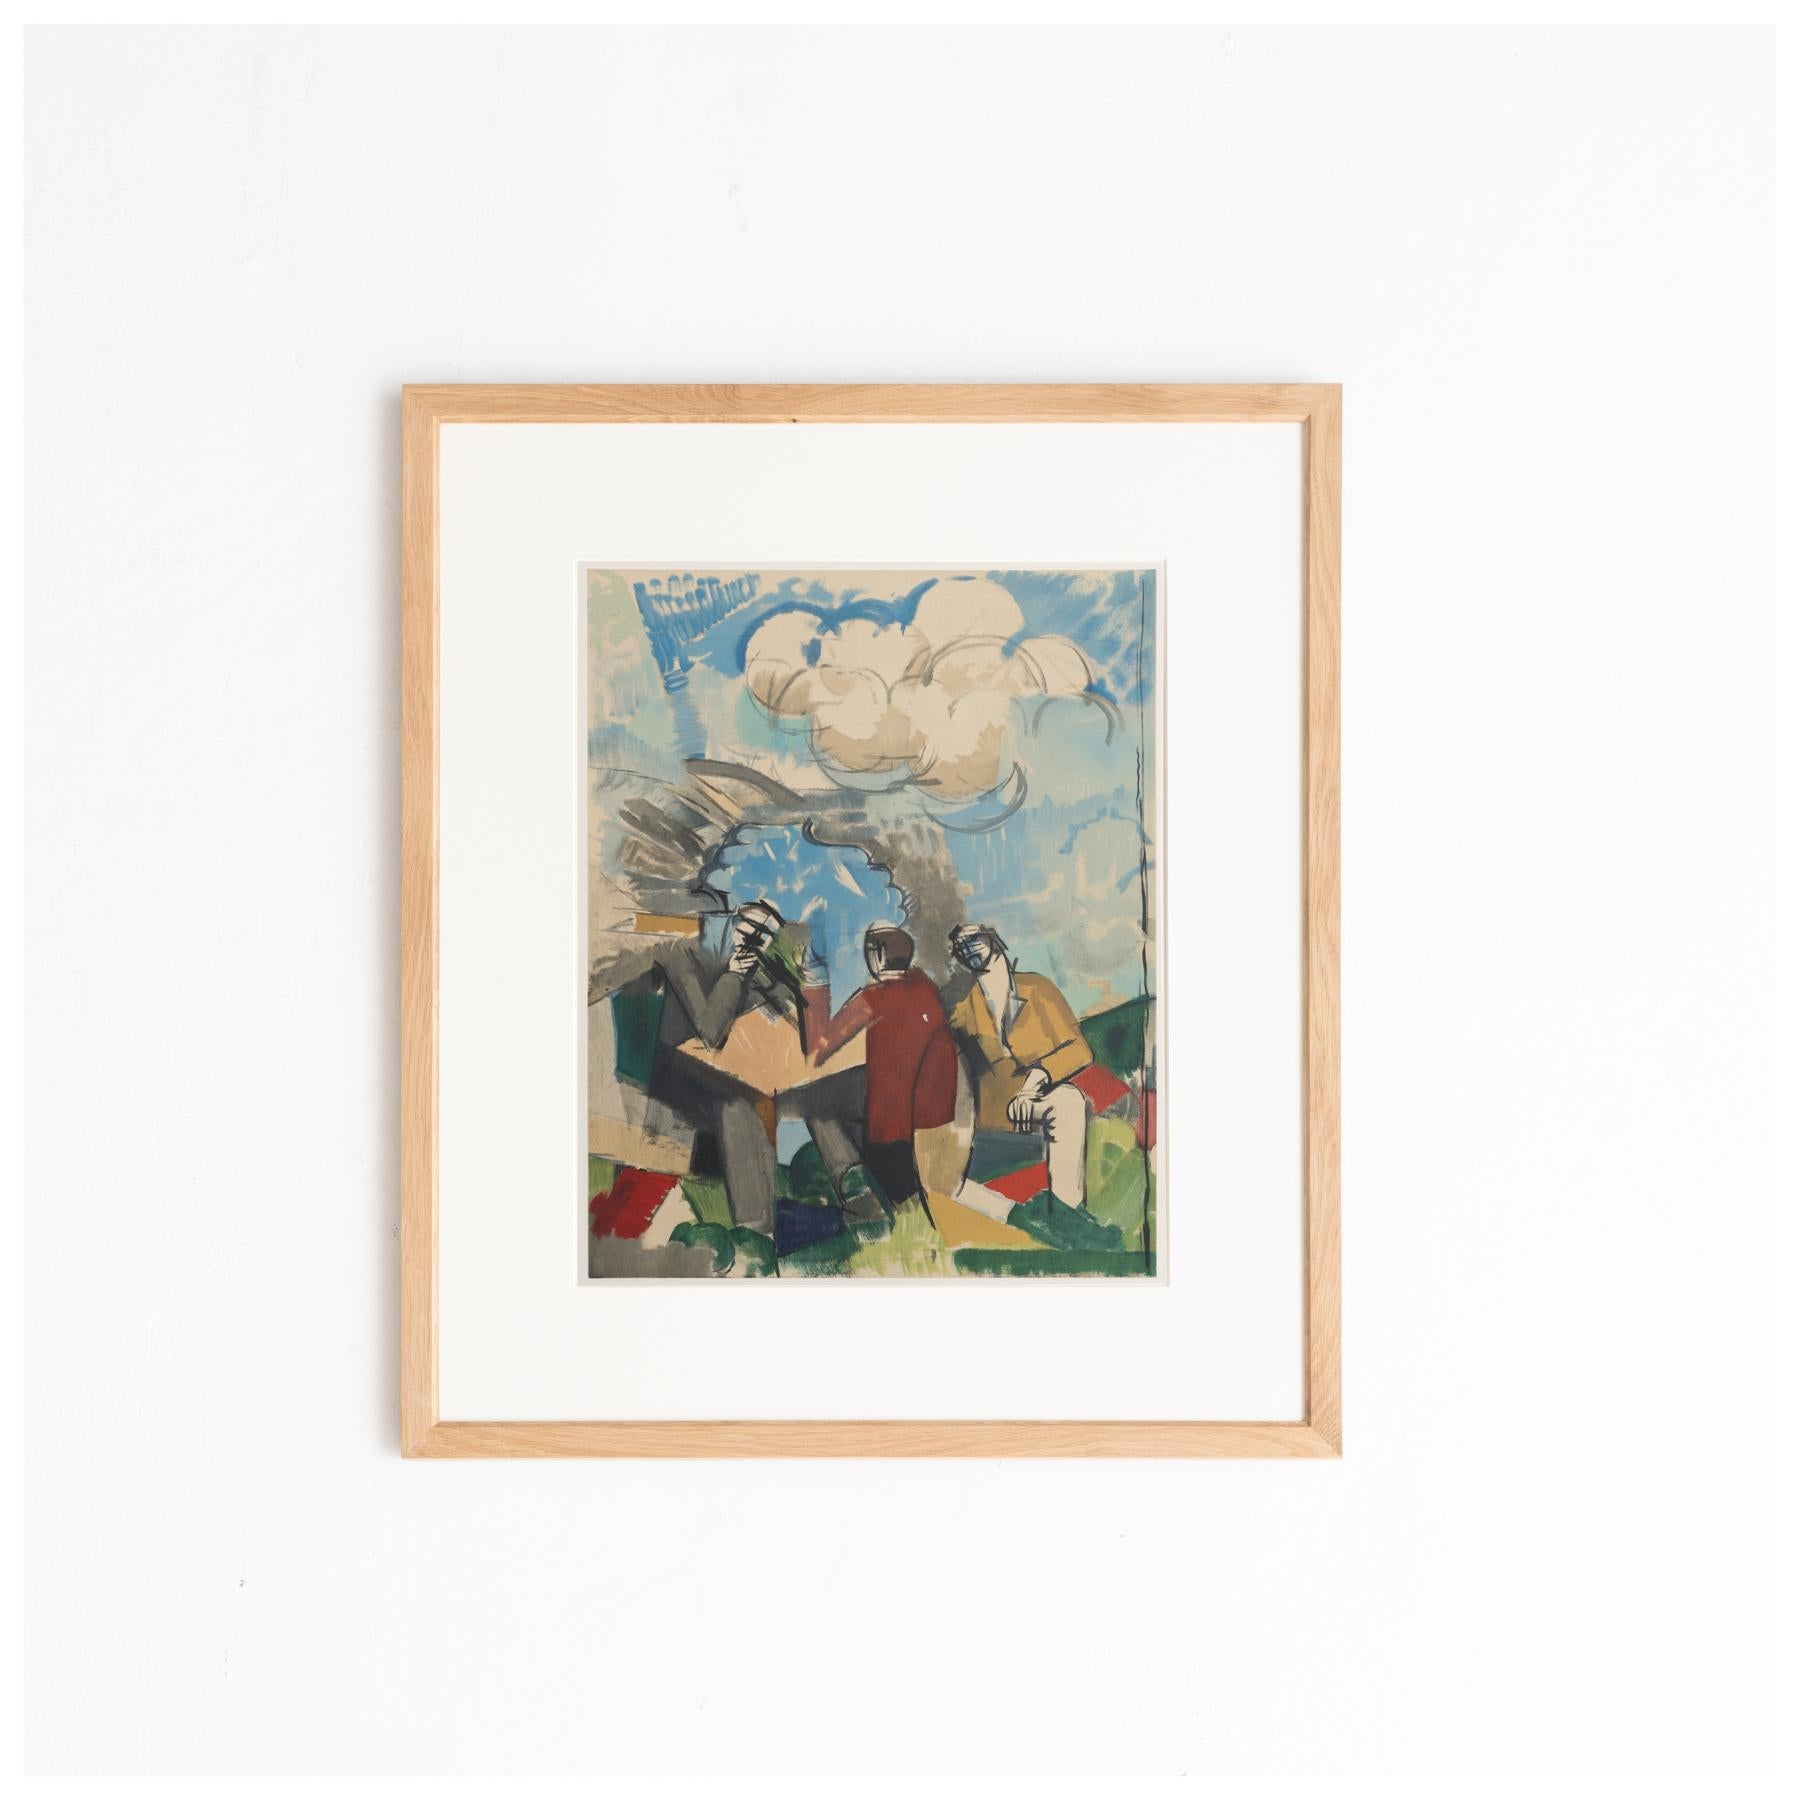 Original color lithograph 'La conquête de l'air' by Roger de la Fresnaye.

Lithograph printed from an original painting made by the author in France, circa 1913.

Published in France by Fernand Mourlot, circa 1968. 

Frame will be slightly